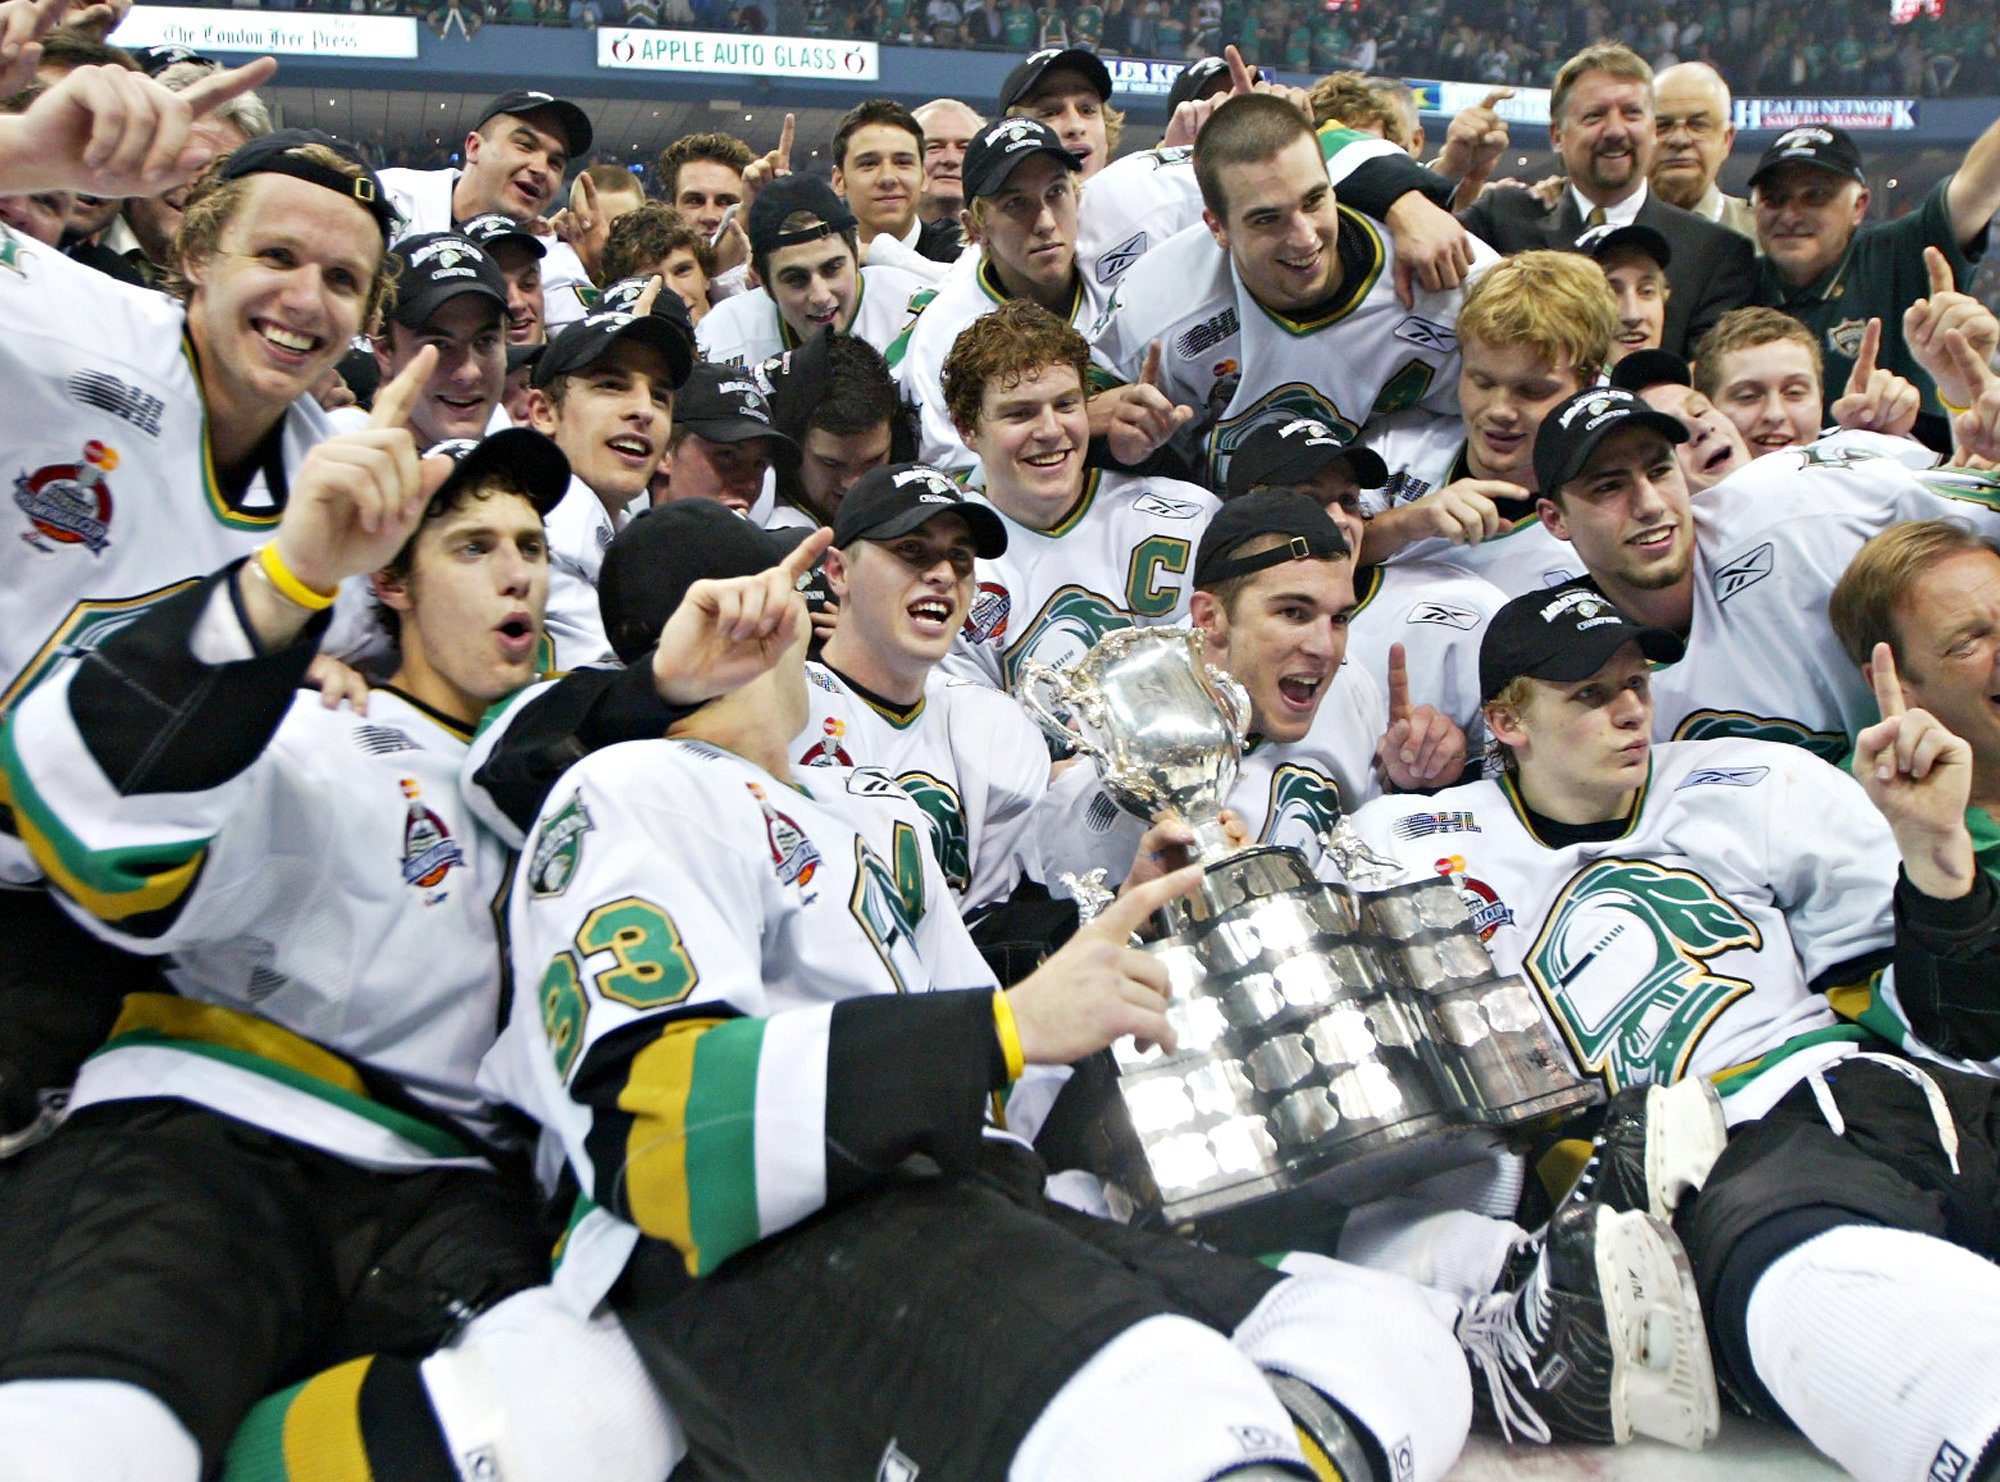 London Knights - #FunFactFriday in the 04/05 season Corey Perry and Captain  Danny Syvret joined the double gold club! Winning IIHF World Junior Gold  and the Memorial Cup in the same season!